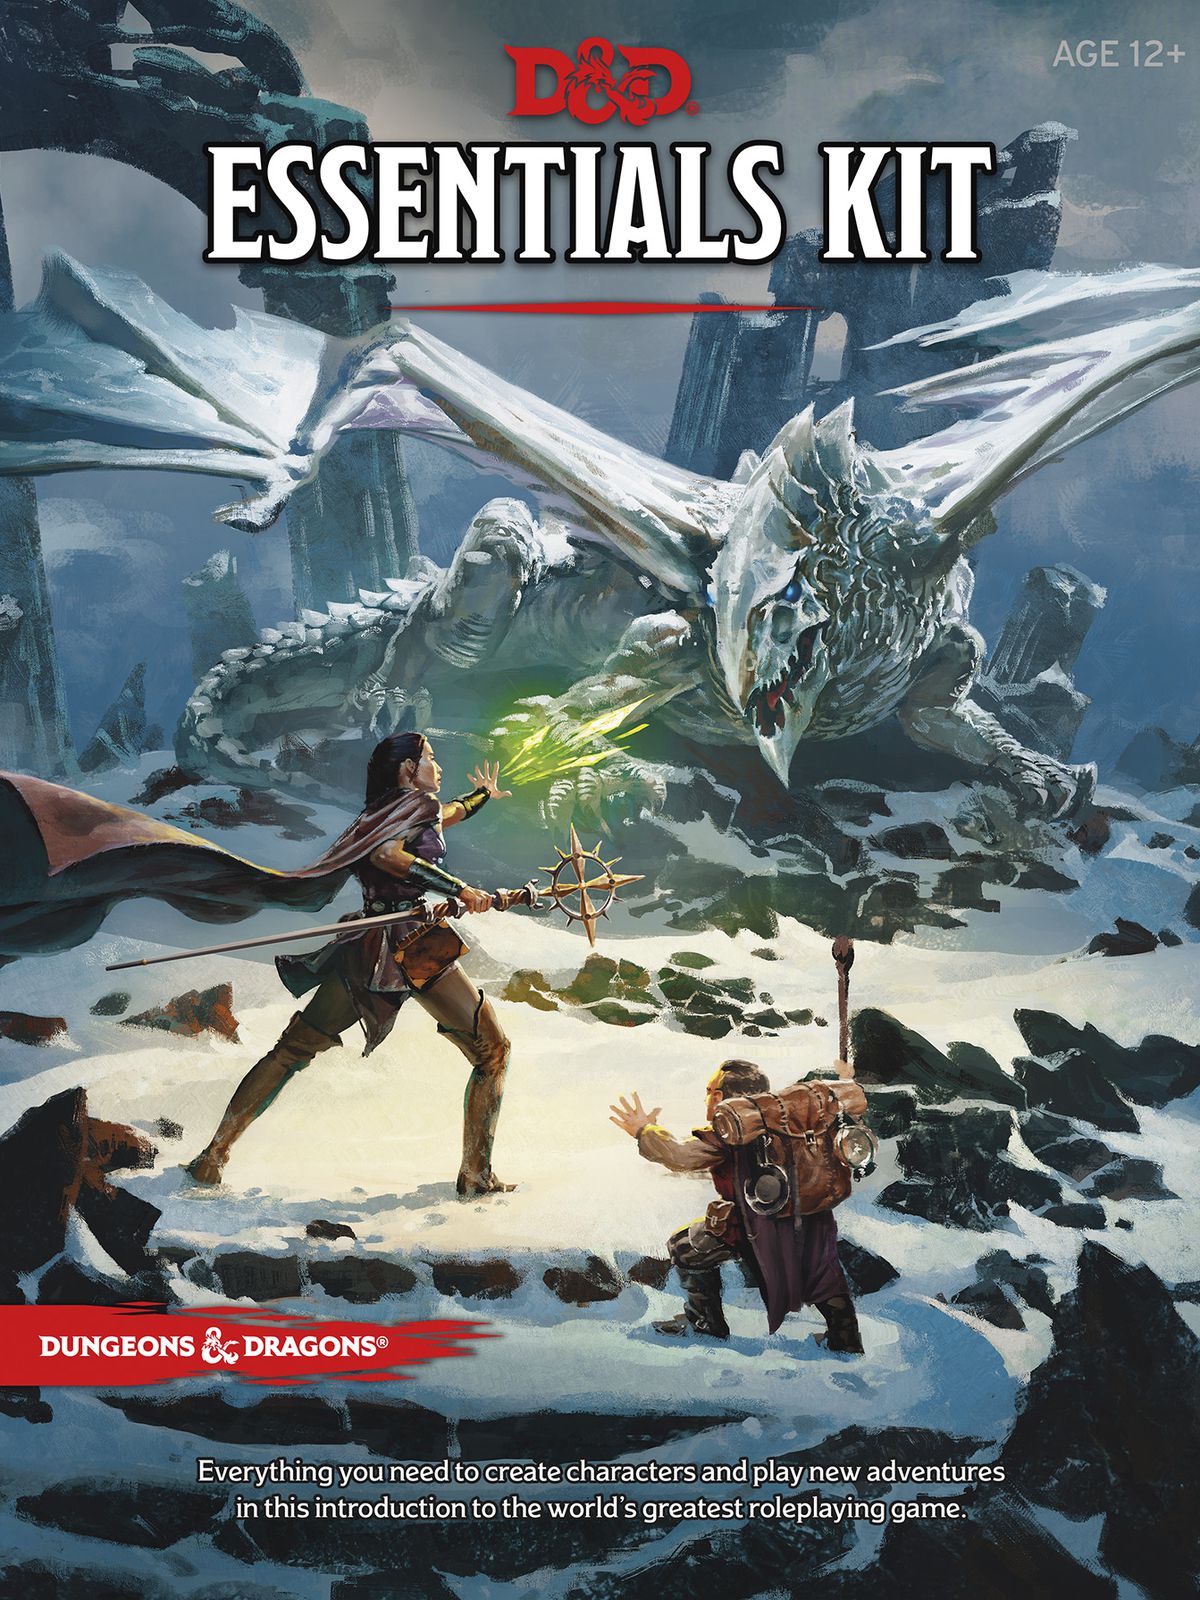 Cover art for the Dungeons &amp; Dragons Essentials Kit shows a player-character and their sidekick going up against a dragon on a snowy hilltop.